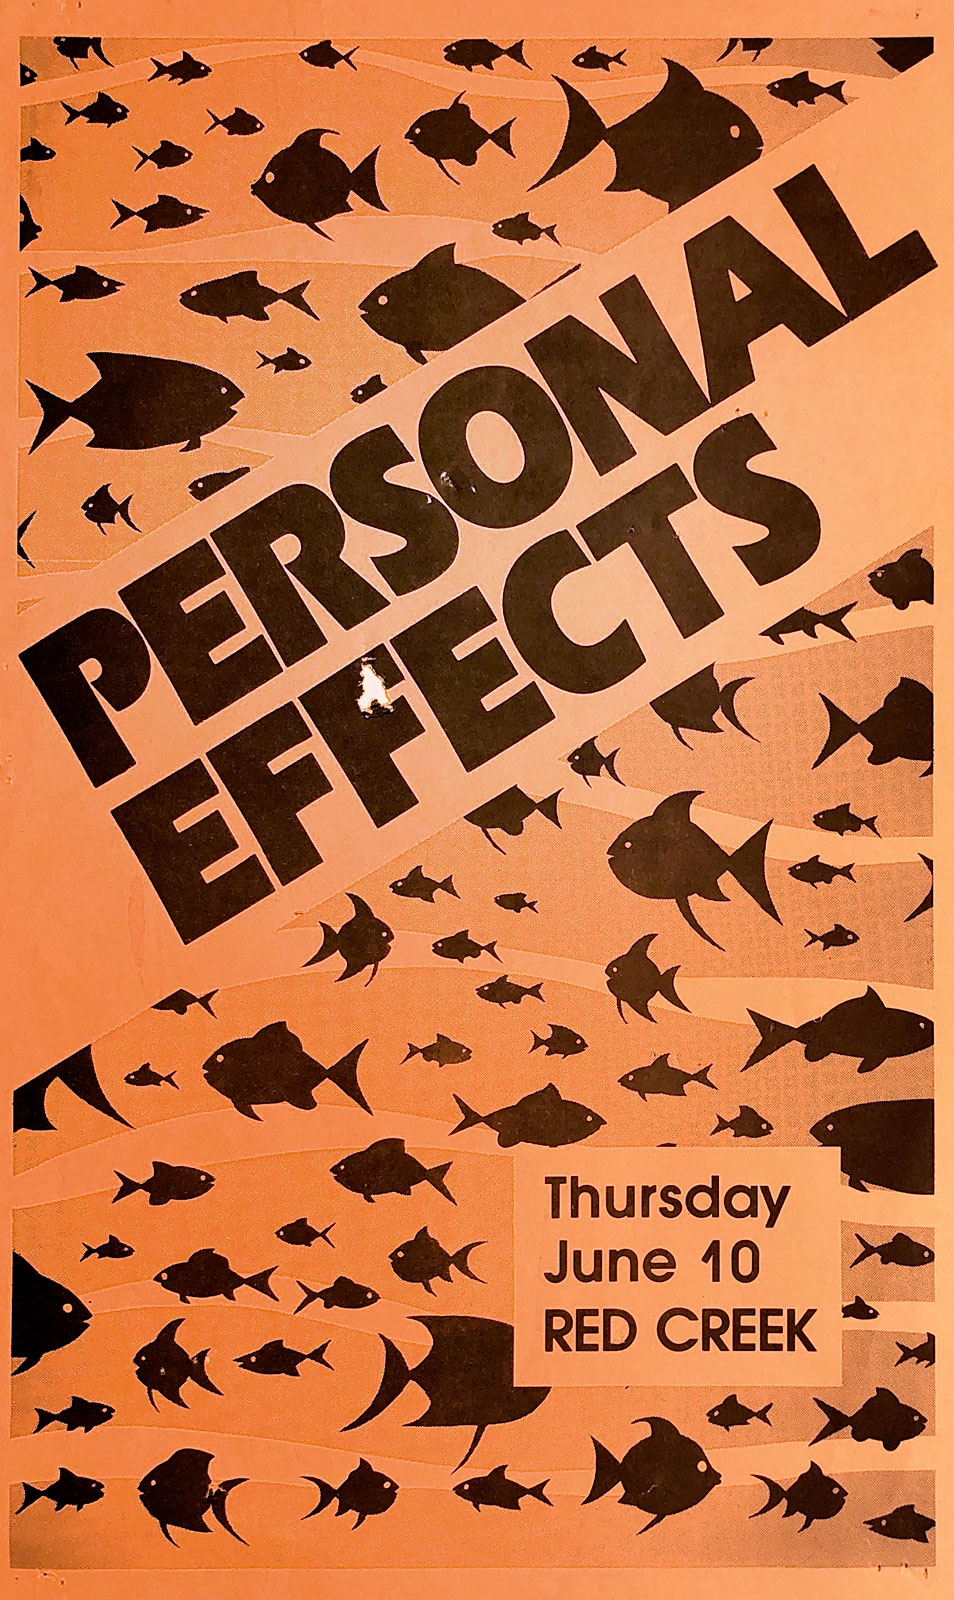 Poster for Personal Effects at Red Creek in Rochester, New York on 06.10.1982